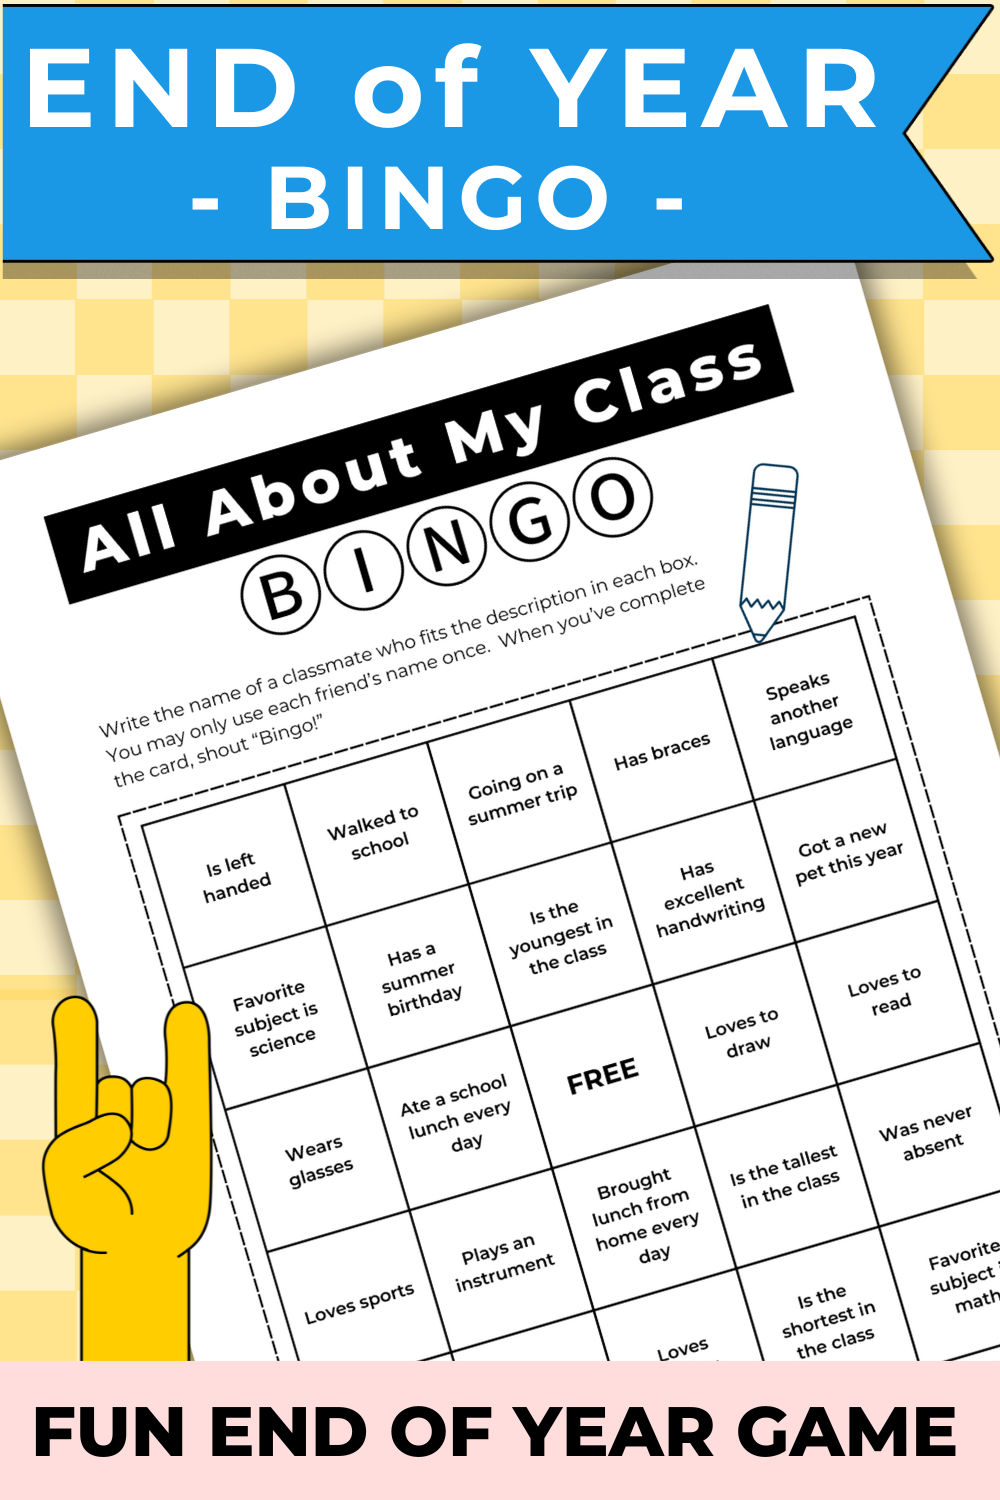 All About My Class Bingo Activity For The End Of The Year Fun Classroom Activities Icebreaker Activities Class Bingo